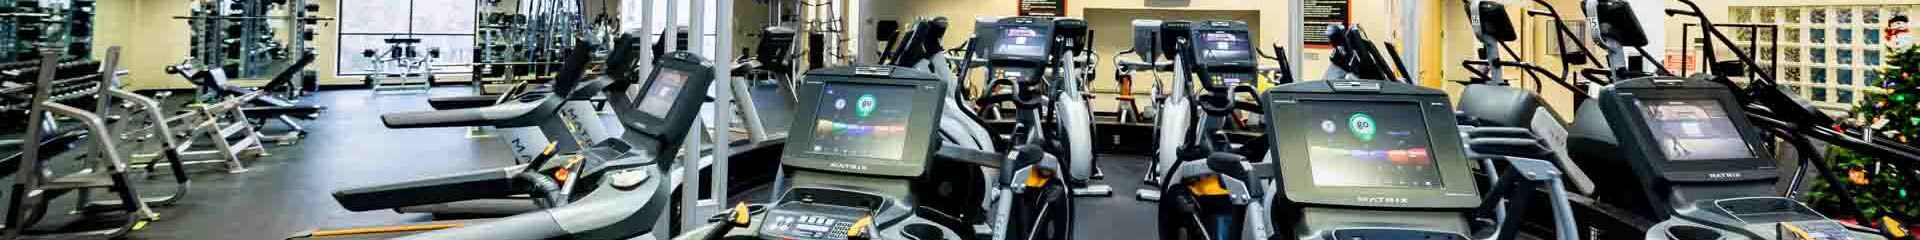 Panoramic view of treadmills in the gym